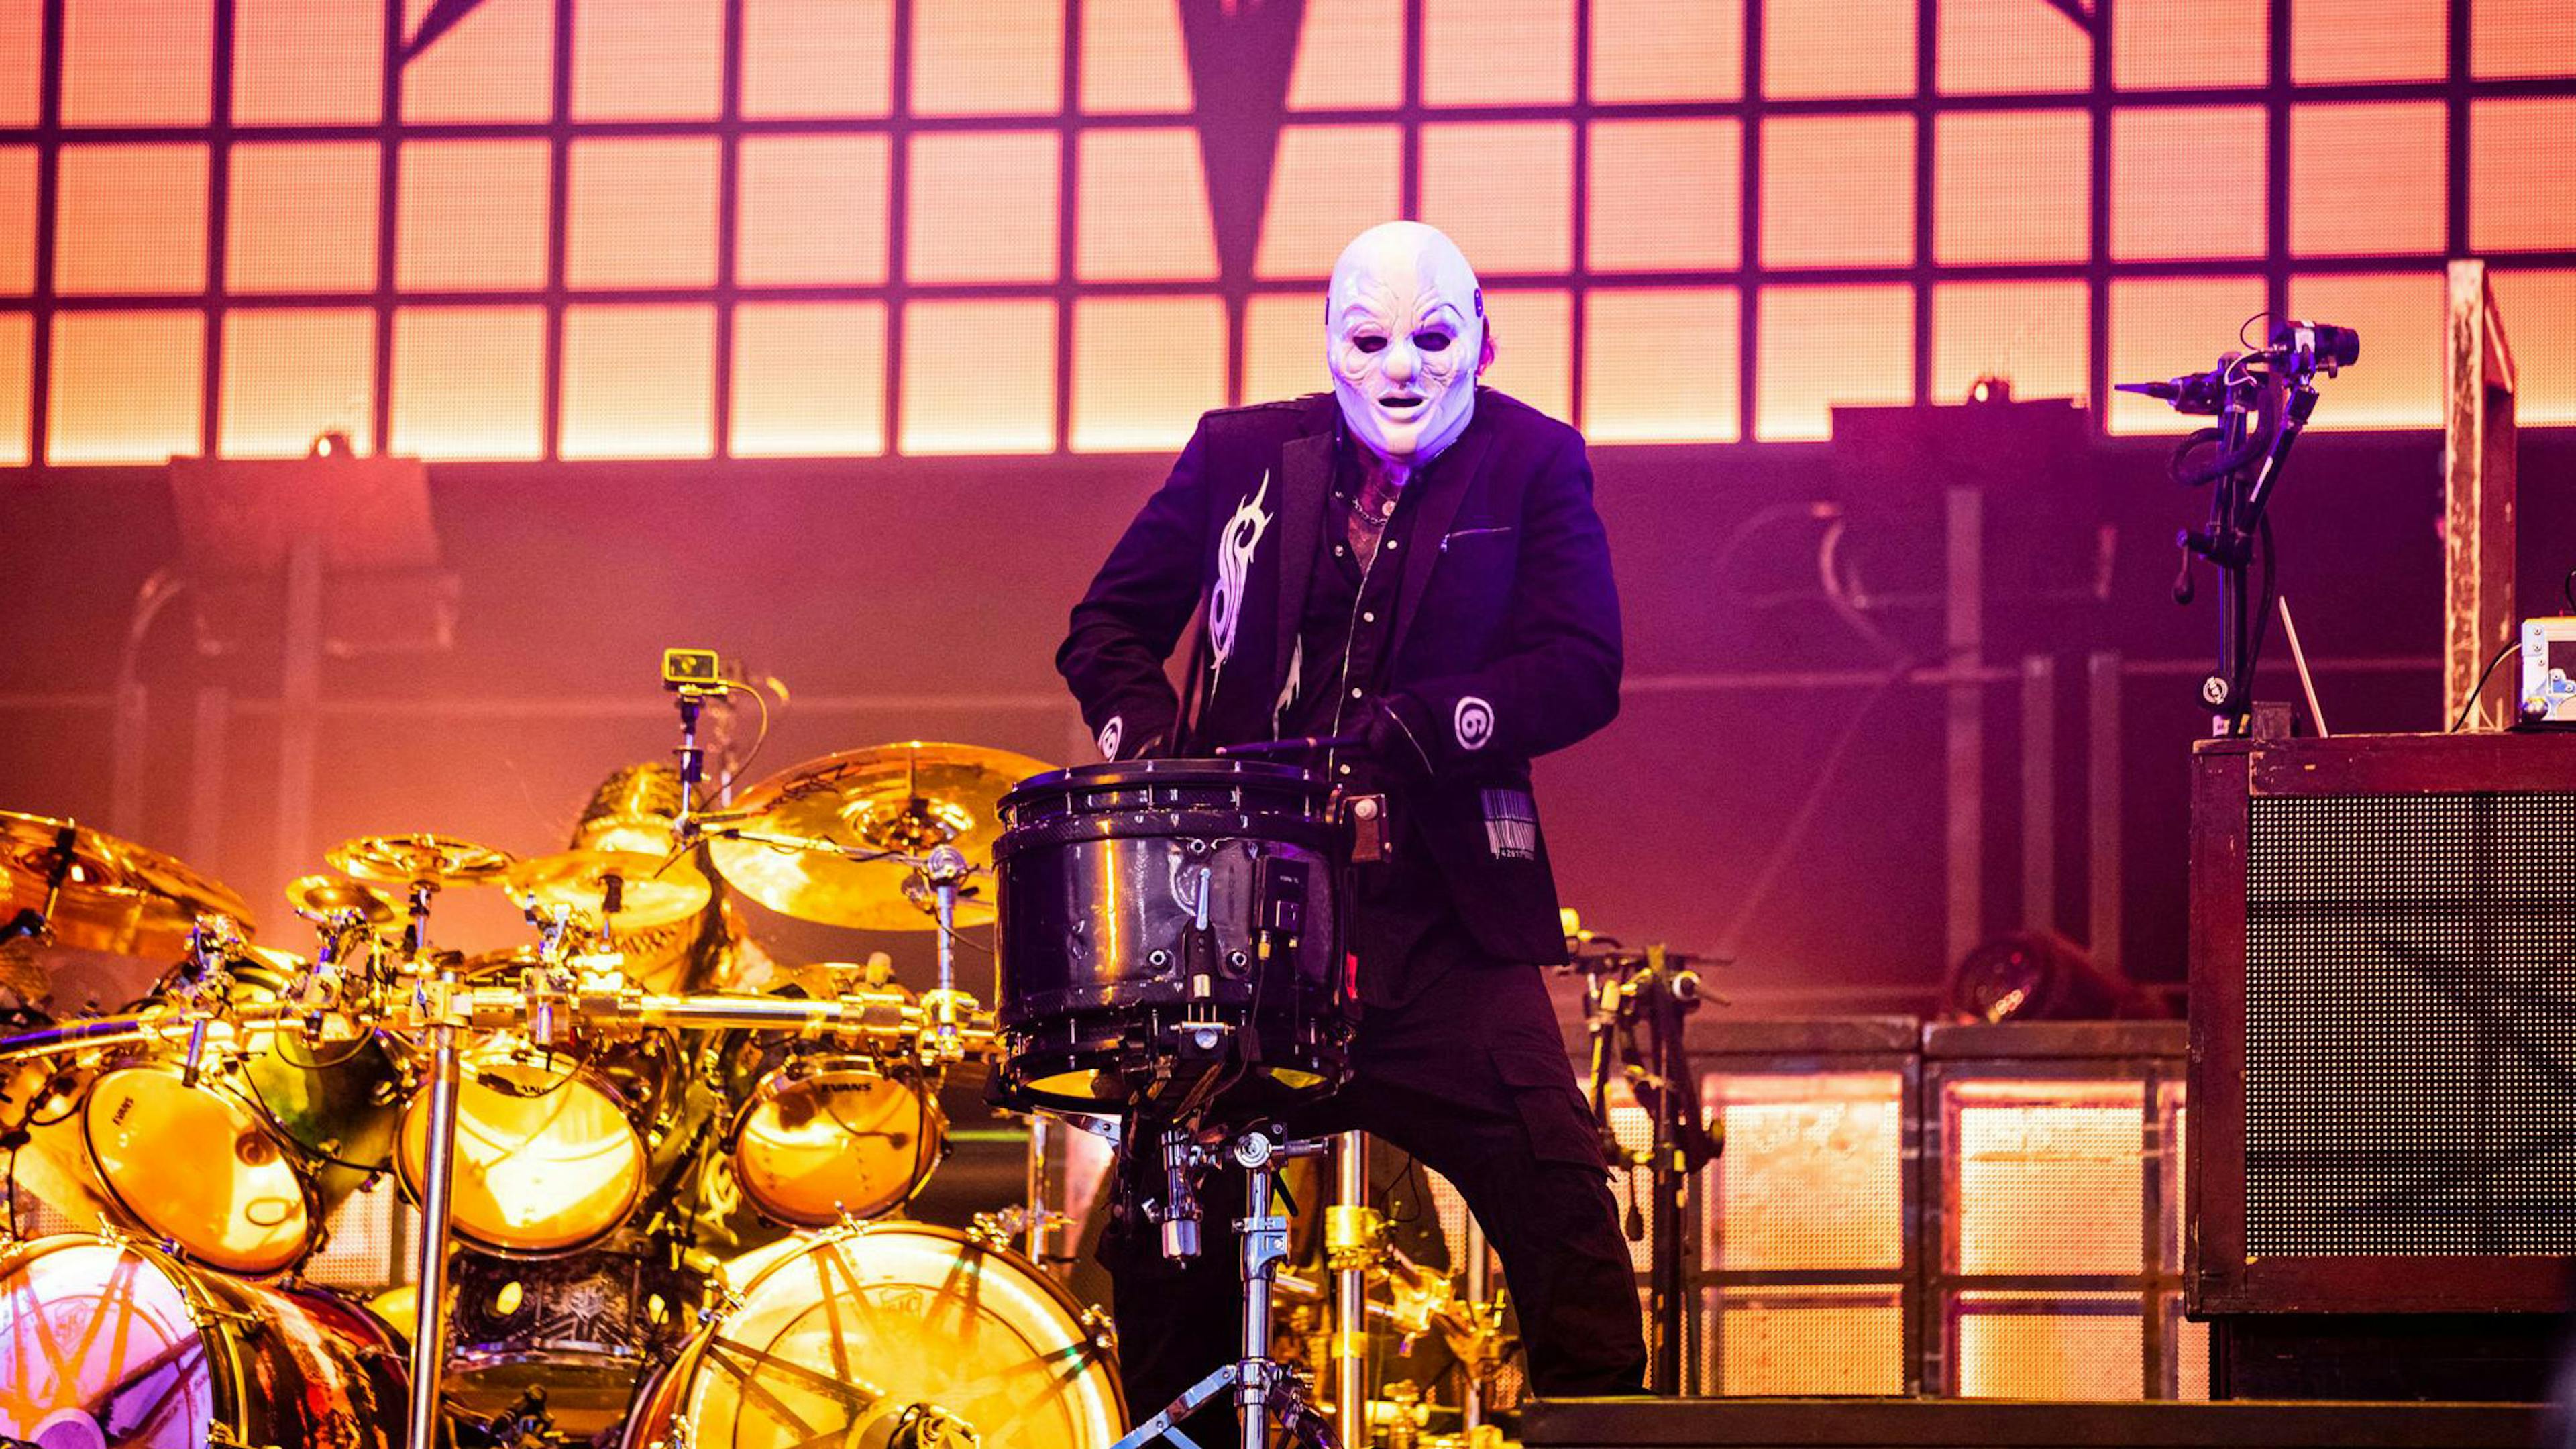 See Slipknot’s Clown rocking out in the studio